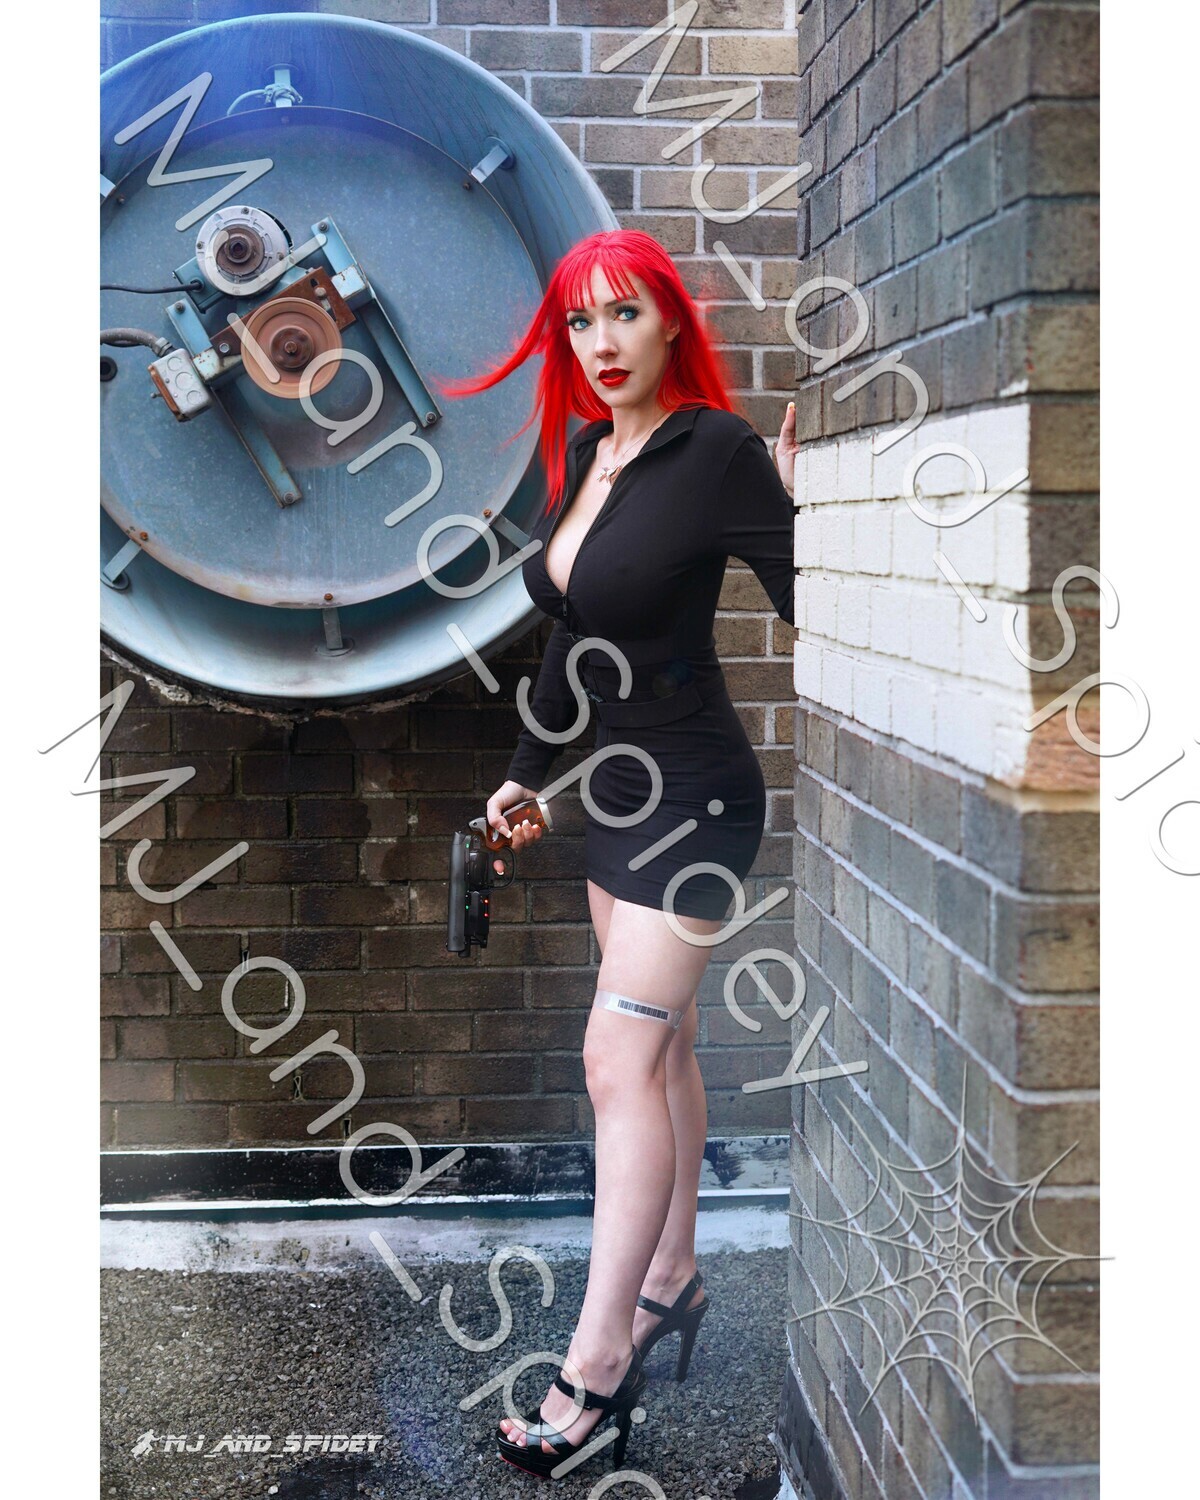 Cyberpunk - Mary Jane Watson - Replicant - 1 - Digital Cosplay Image (@MJ_and_Spidey, Sci Fi, Science Fiction, Blade Runner)